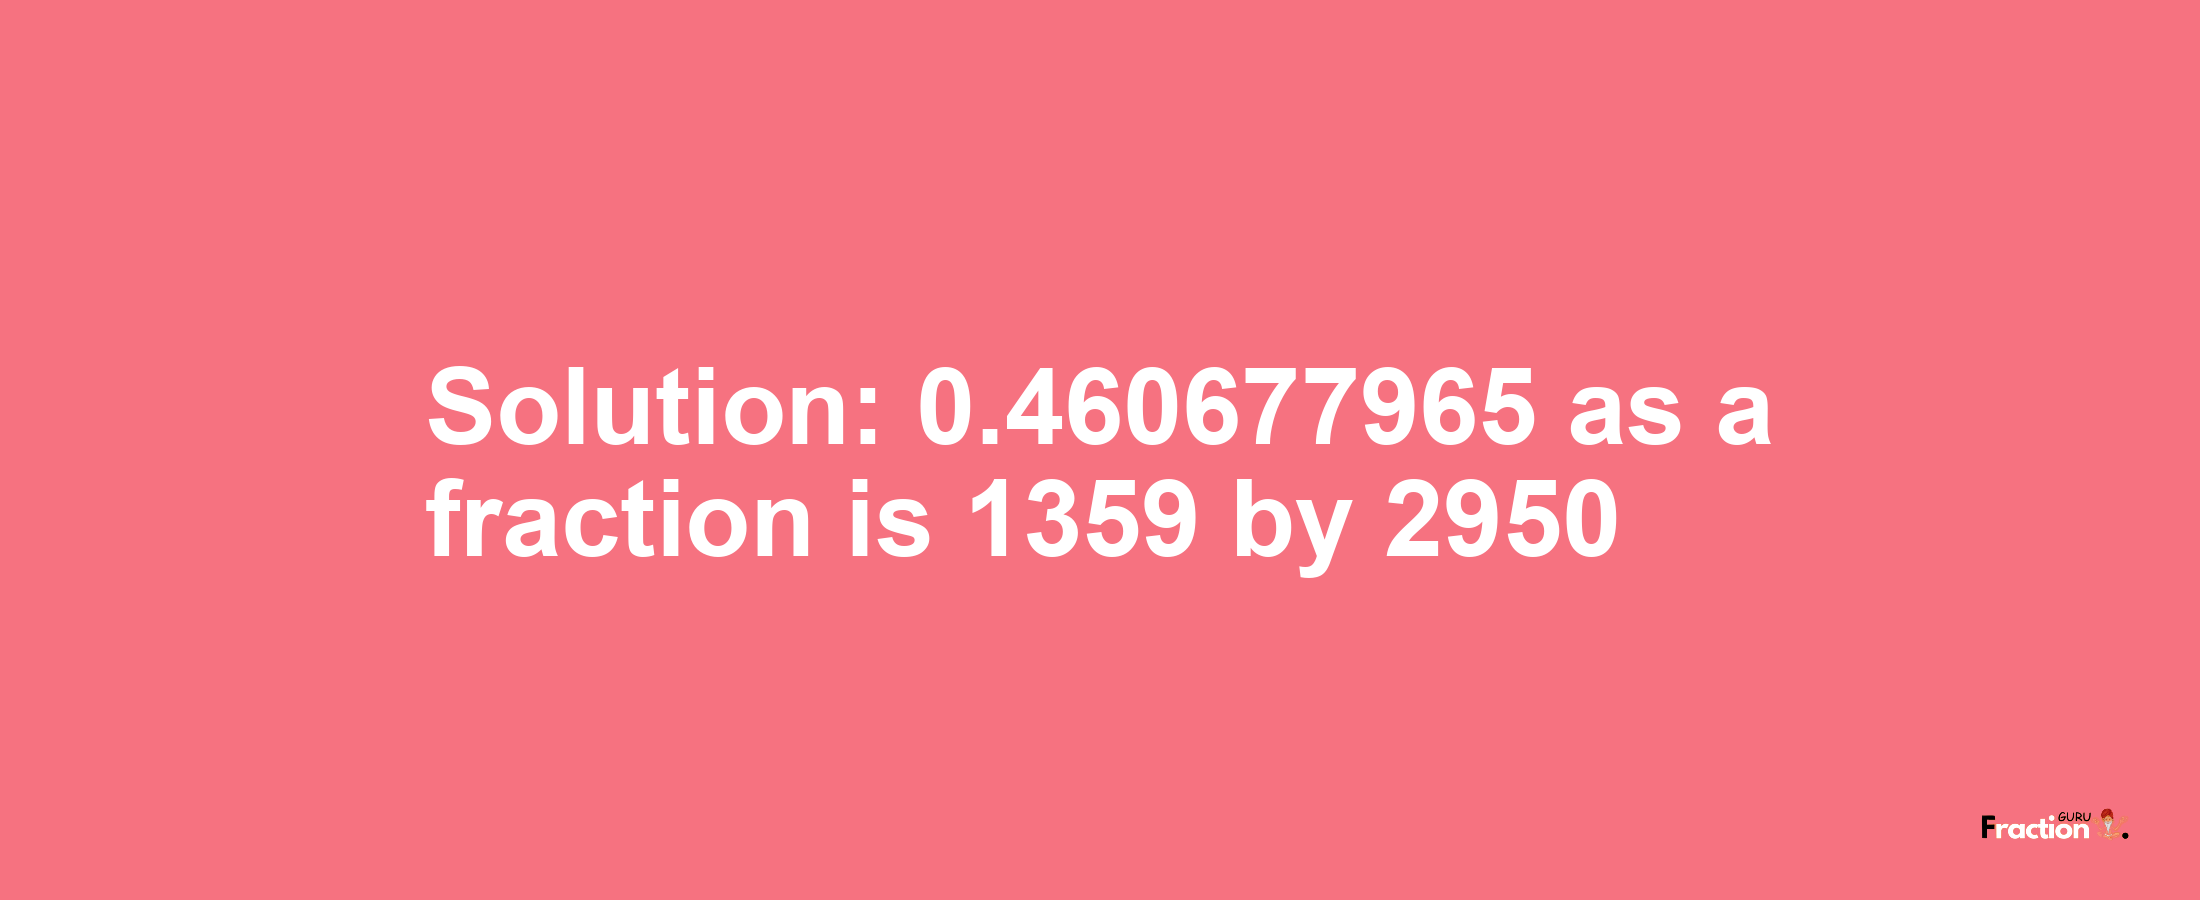 Solution:0.460677965 as a fraction is 1359/2950